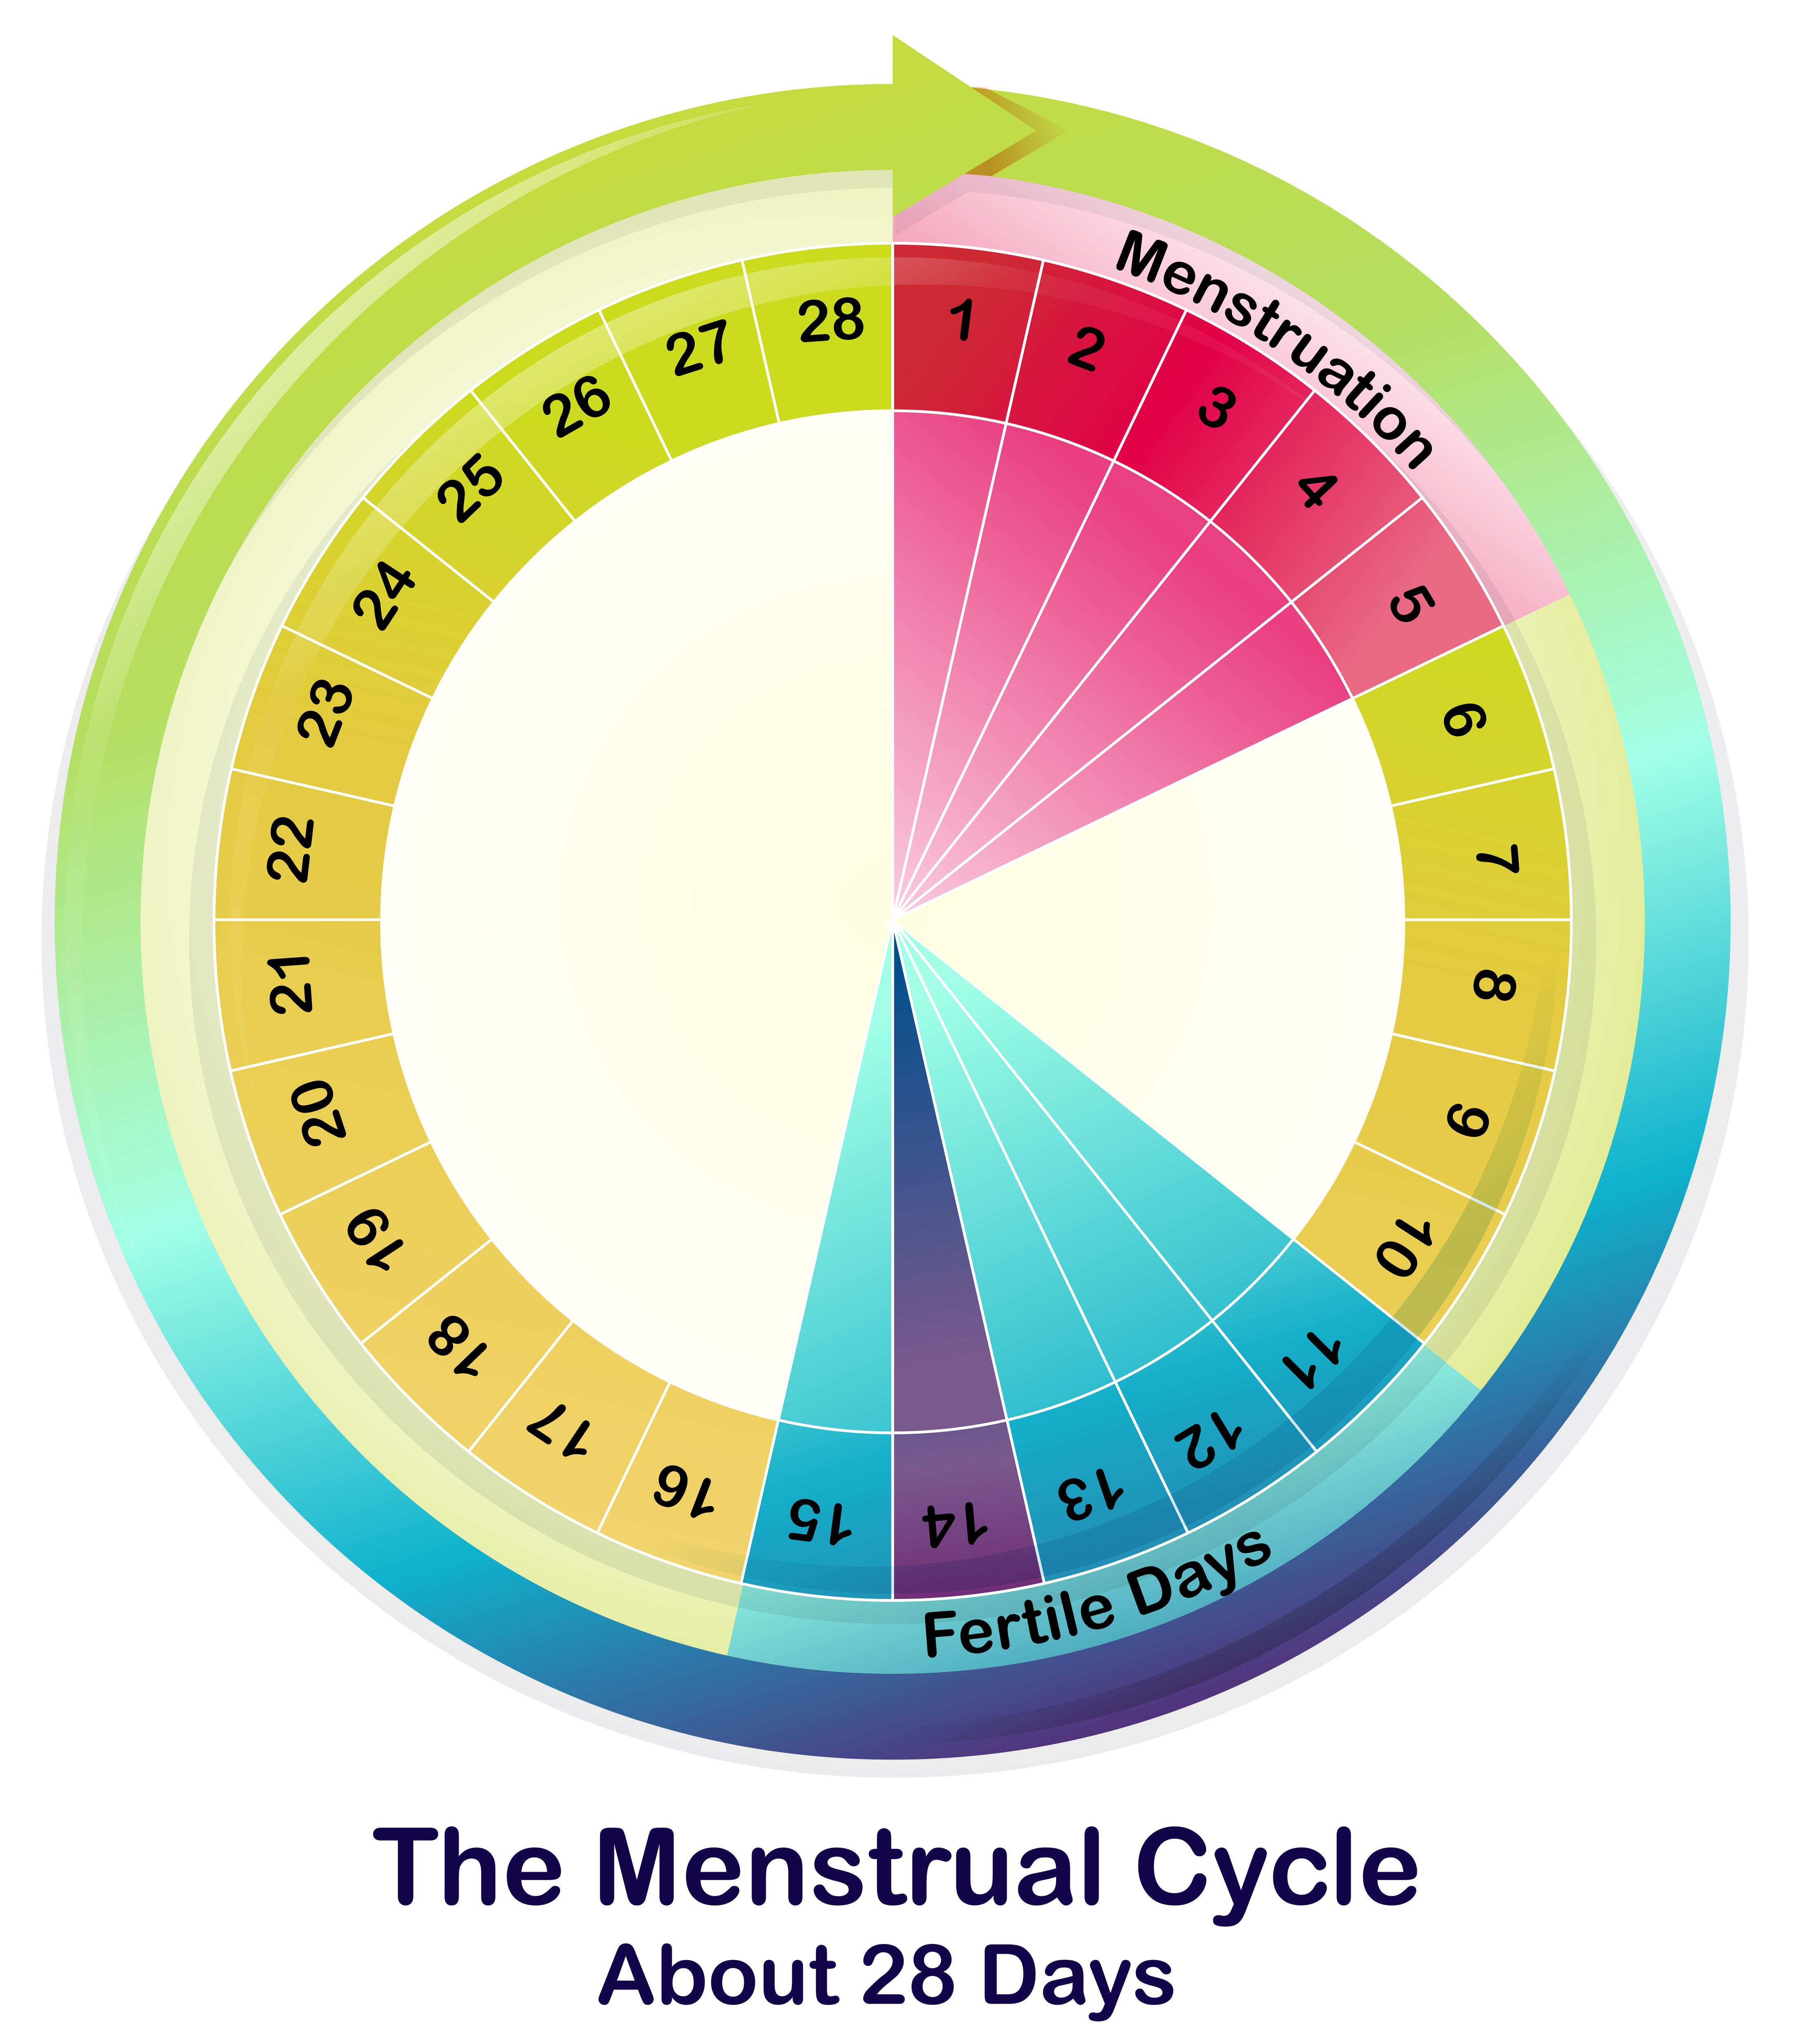 moving with my cycle: luteal phase - the 10-14 days after